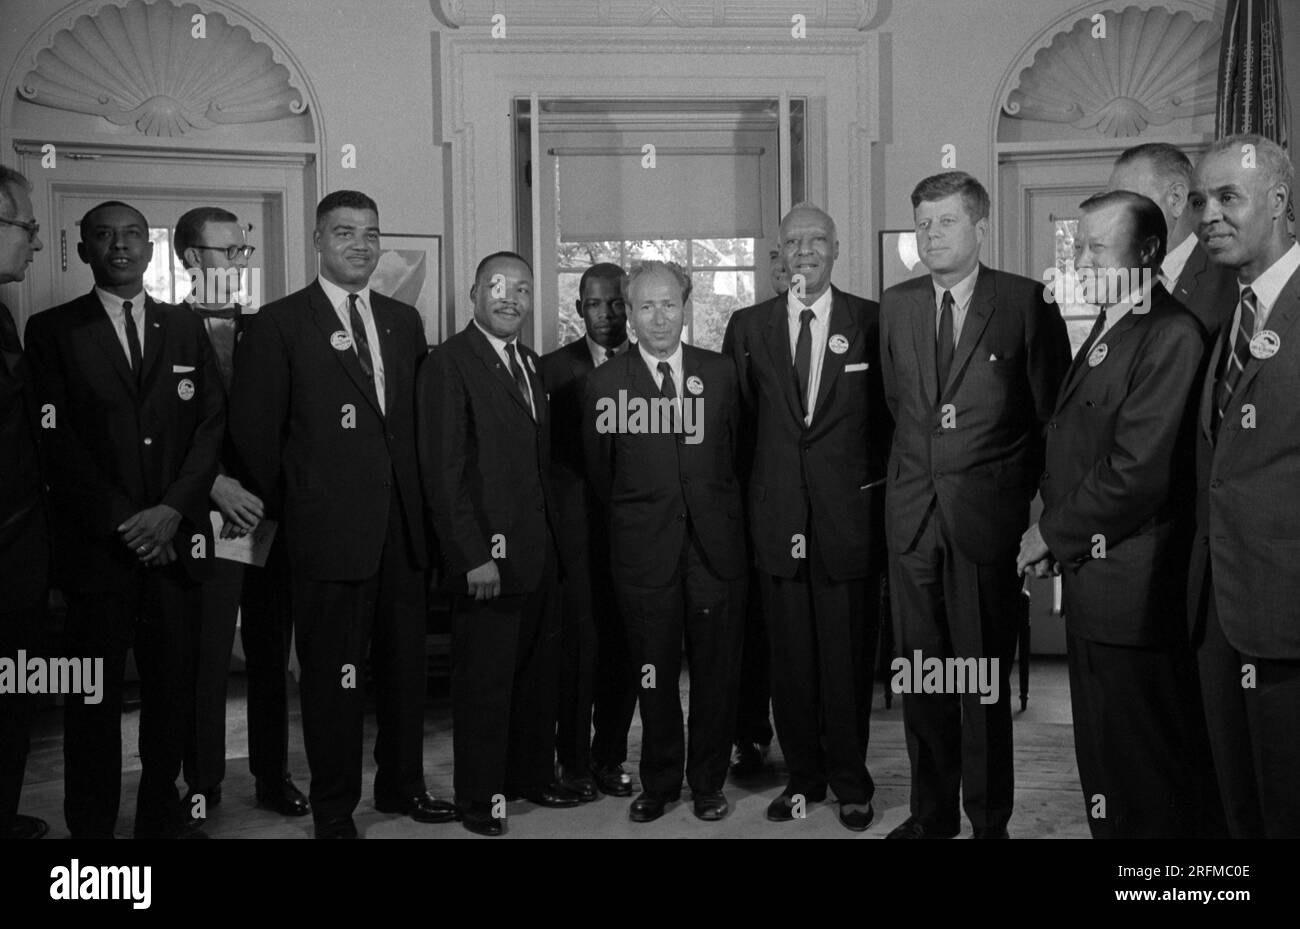 Civil rights leaders meet with President John F. Kennedy in the oval office of the White House after the March on Washington; D.C. Photograph shows (left to right): Willard Wirtz (Secretary of Labour); Floyd McKissick (CORE); Mathew Ahmann (National Catholic Conference for Interracial Justice); Whitney Young (National Urban League); Martin Luther King; Jr.(SCLC); John Lewis (SNCC); Rabbi Joachim Prinz (American Jewish Congress); A. Philip Randolph; with Reverend Eugene Carson Blake partially visible behind him; President John F. Kennedy; Walter Reuther (labour leader); with Vice President Lynd Stock Photo